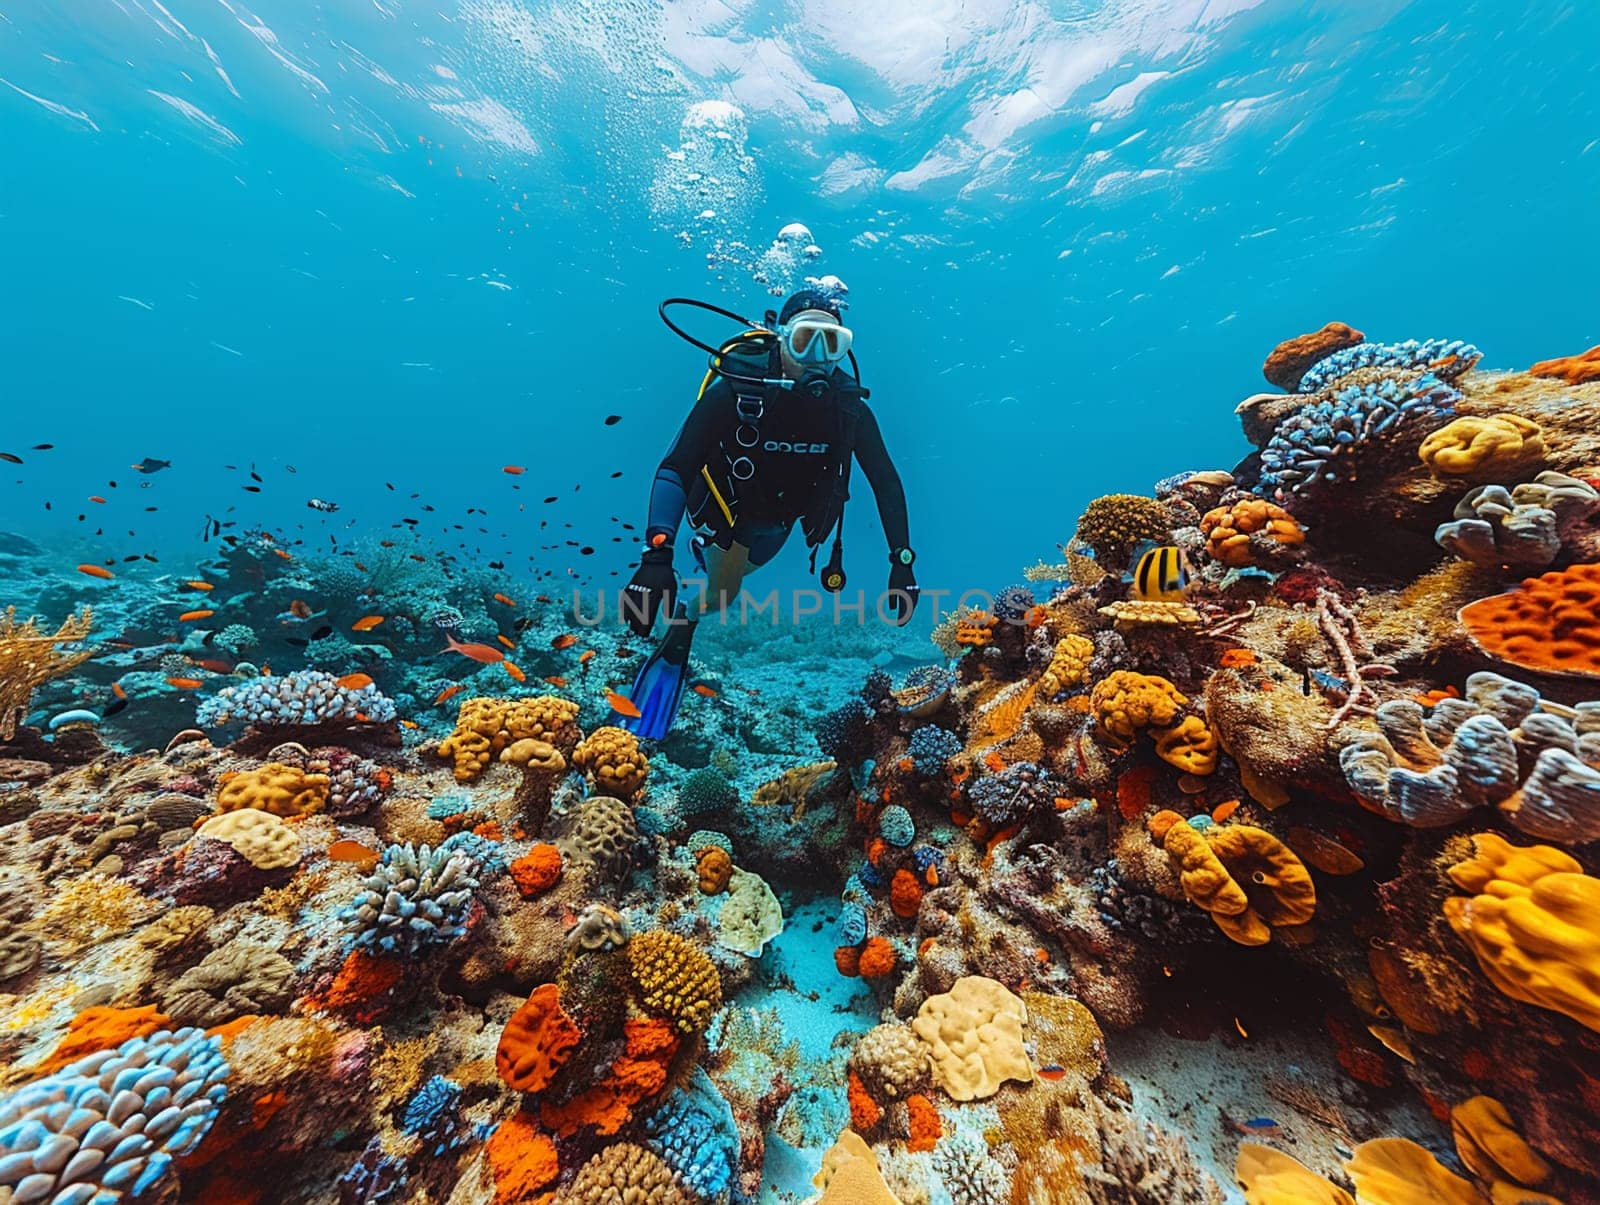 Scuba diver exploring a coral reef, showcasing underwater adventure and discovery.